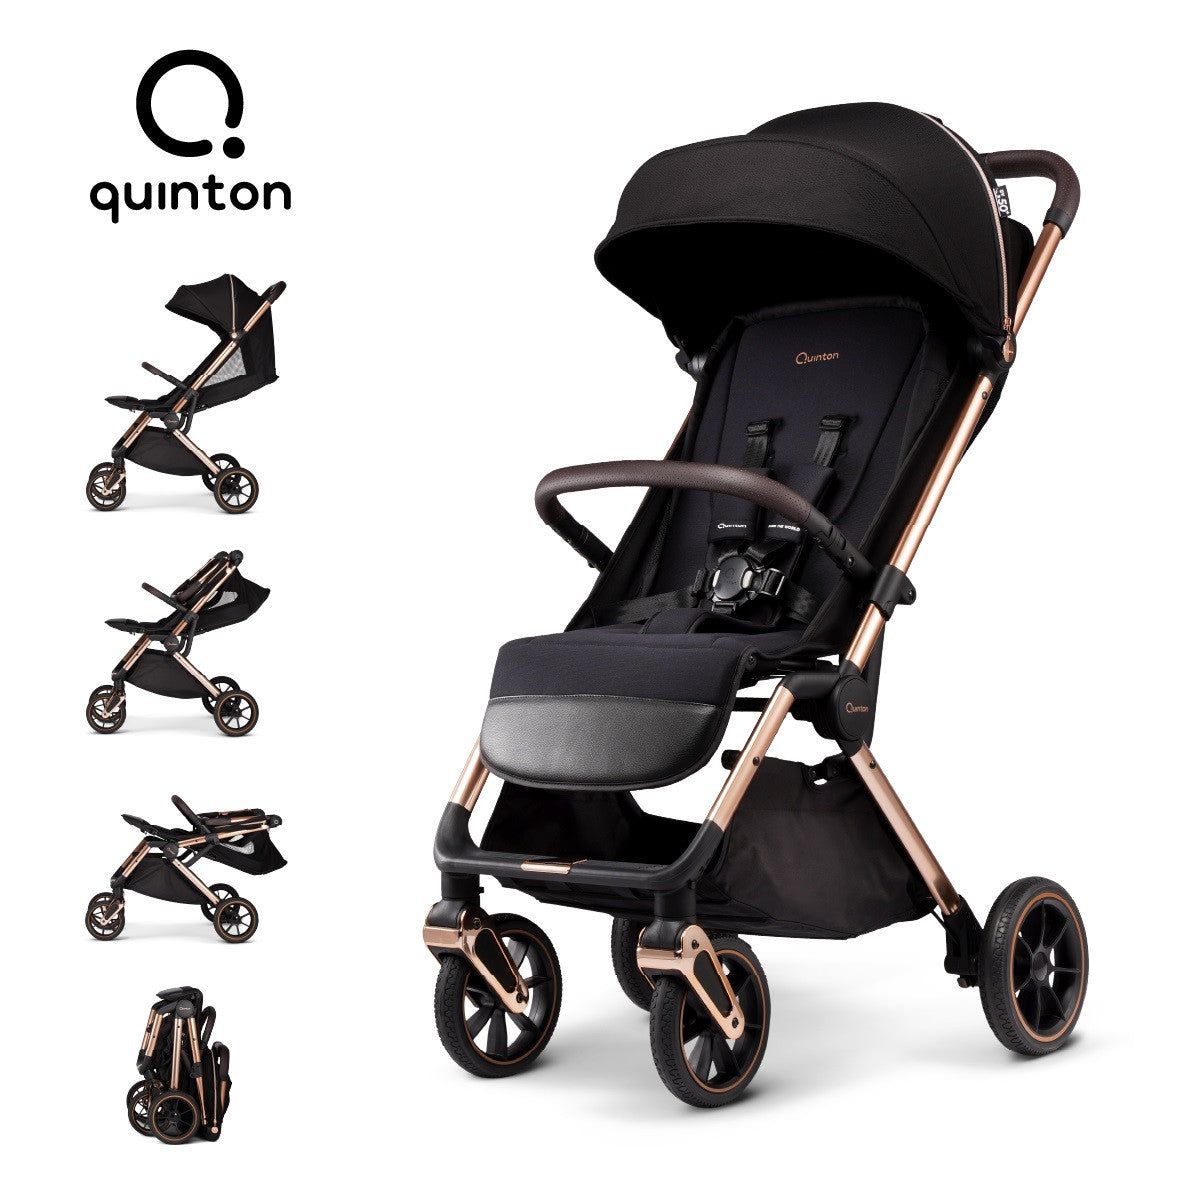 Quinton Roxy Auto Fold Compact / Cabin Size Baby Stroller, Suitable For Newborn to 22kg